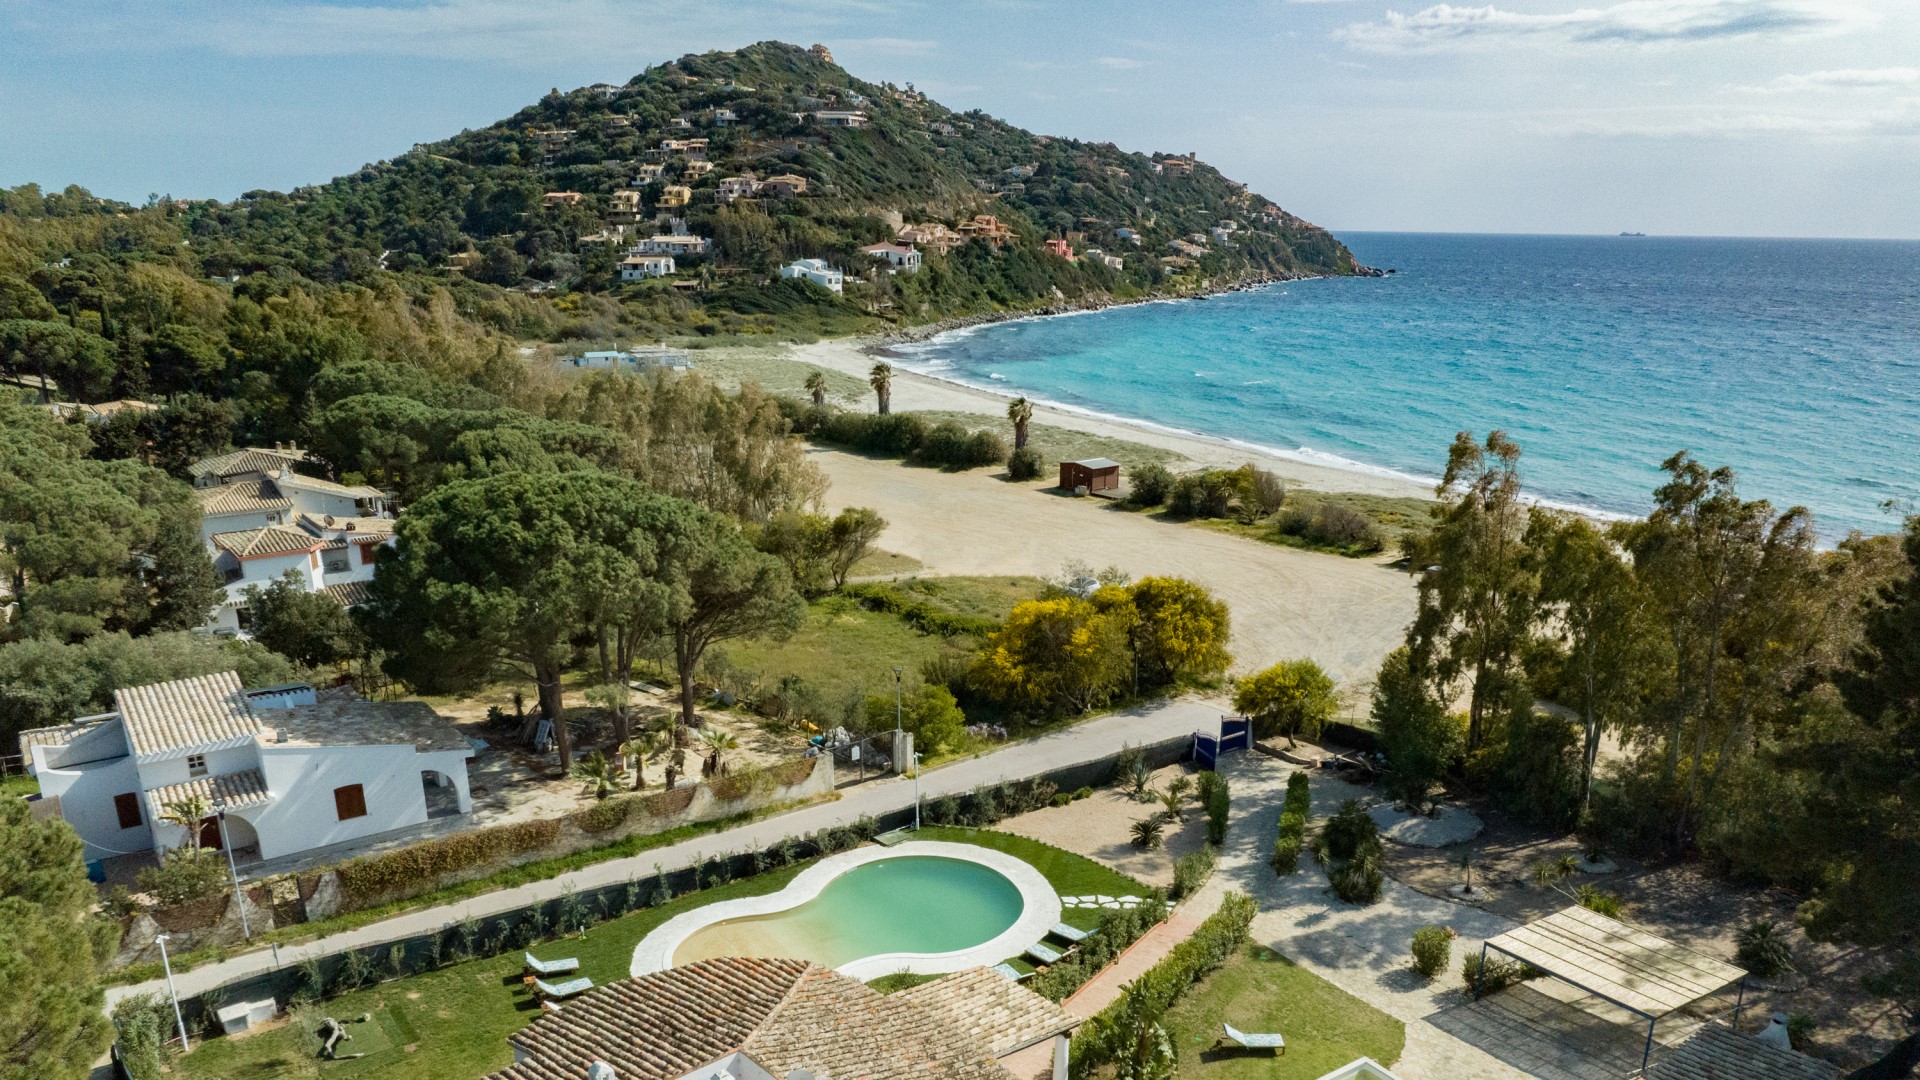 Luxury Villa Sandra in Sardinia for Rent | Villa with Pool and Seaview